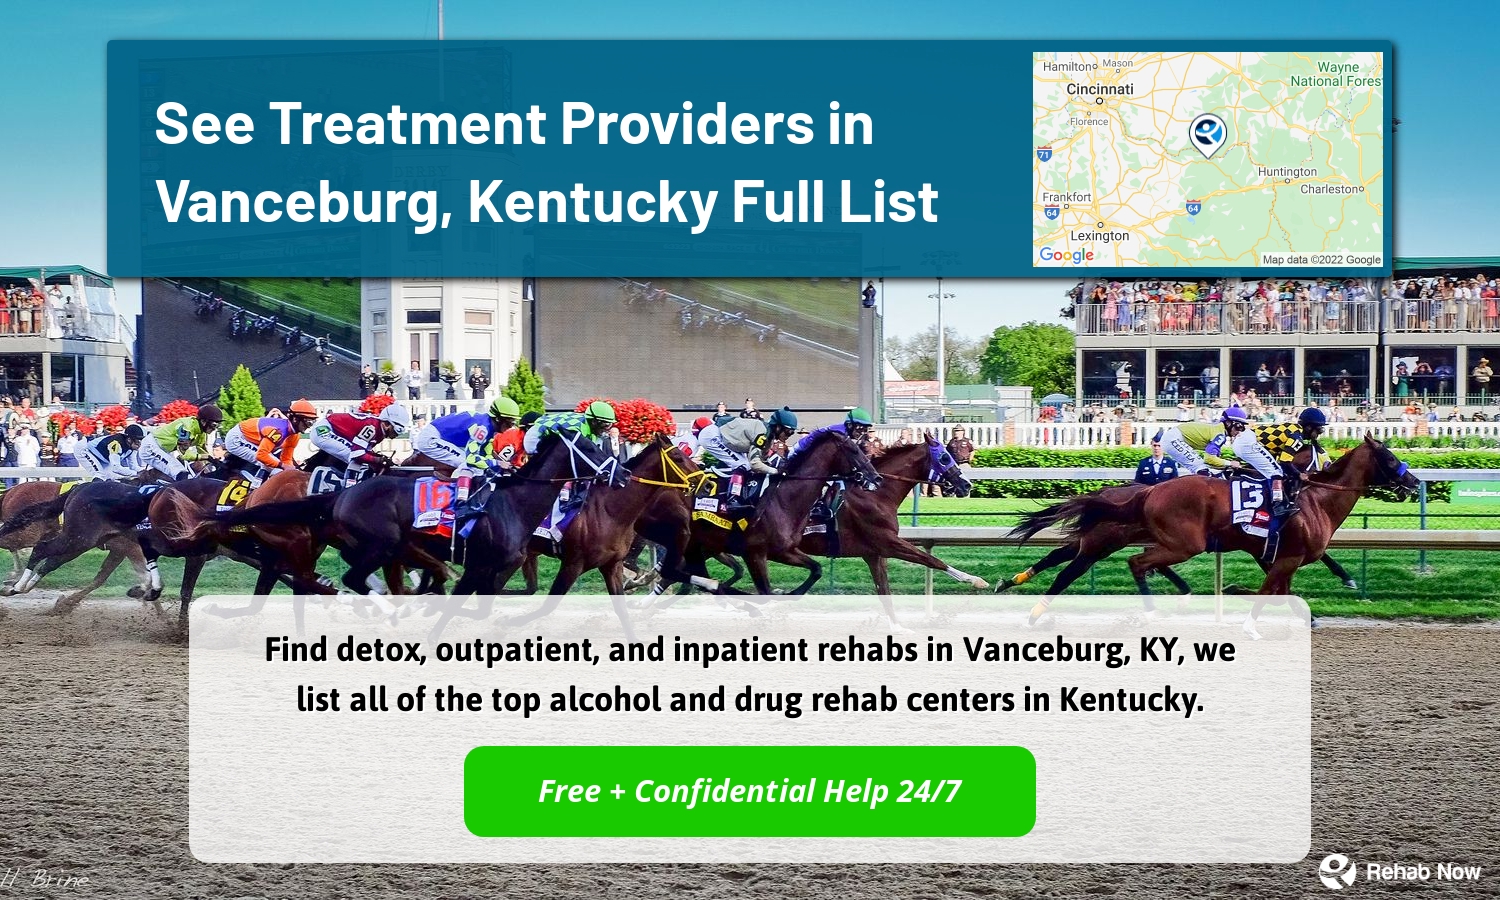 Find detox, outpatient, and inpatient rehabs in Vanceburg, KY, we list all of the top alcohol and drug rehab centers in Kentucky.